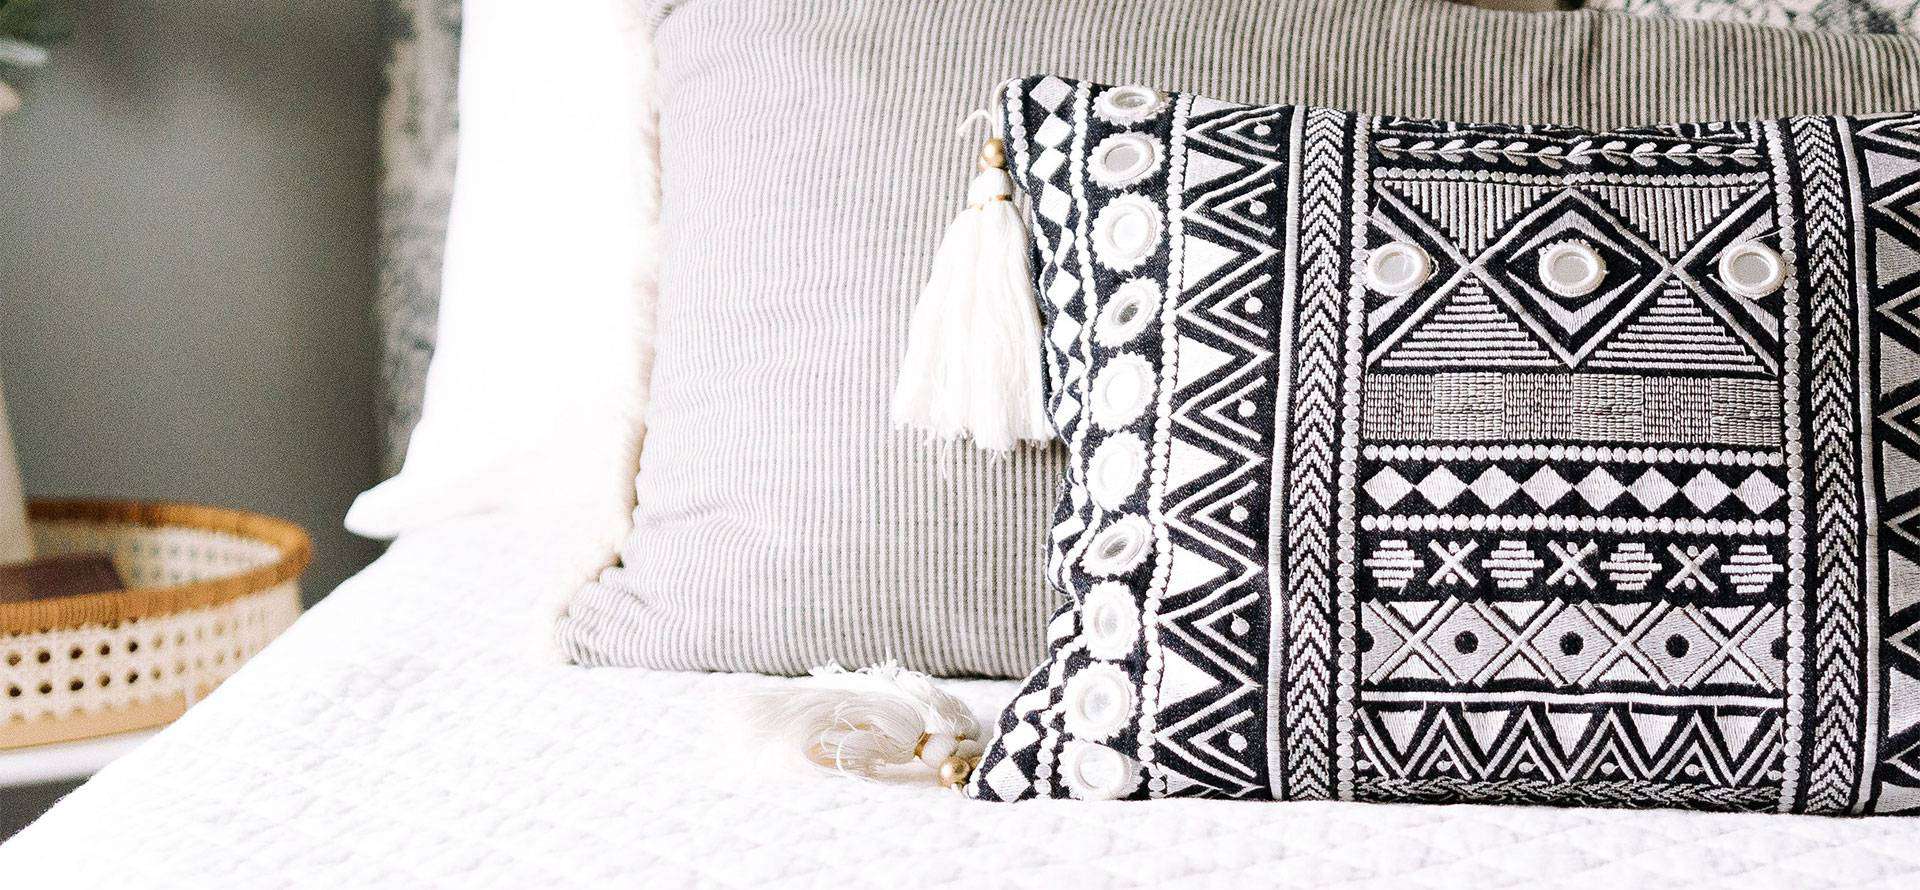 Throw pillows on the bed.